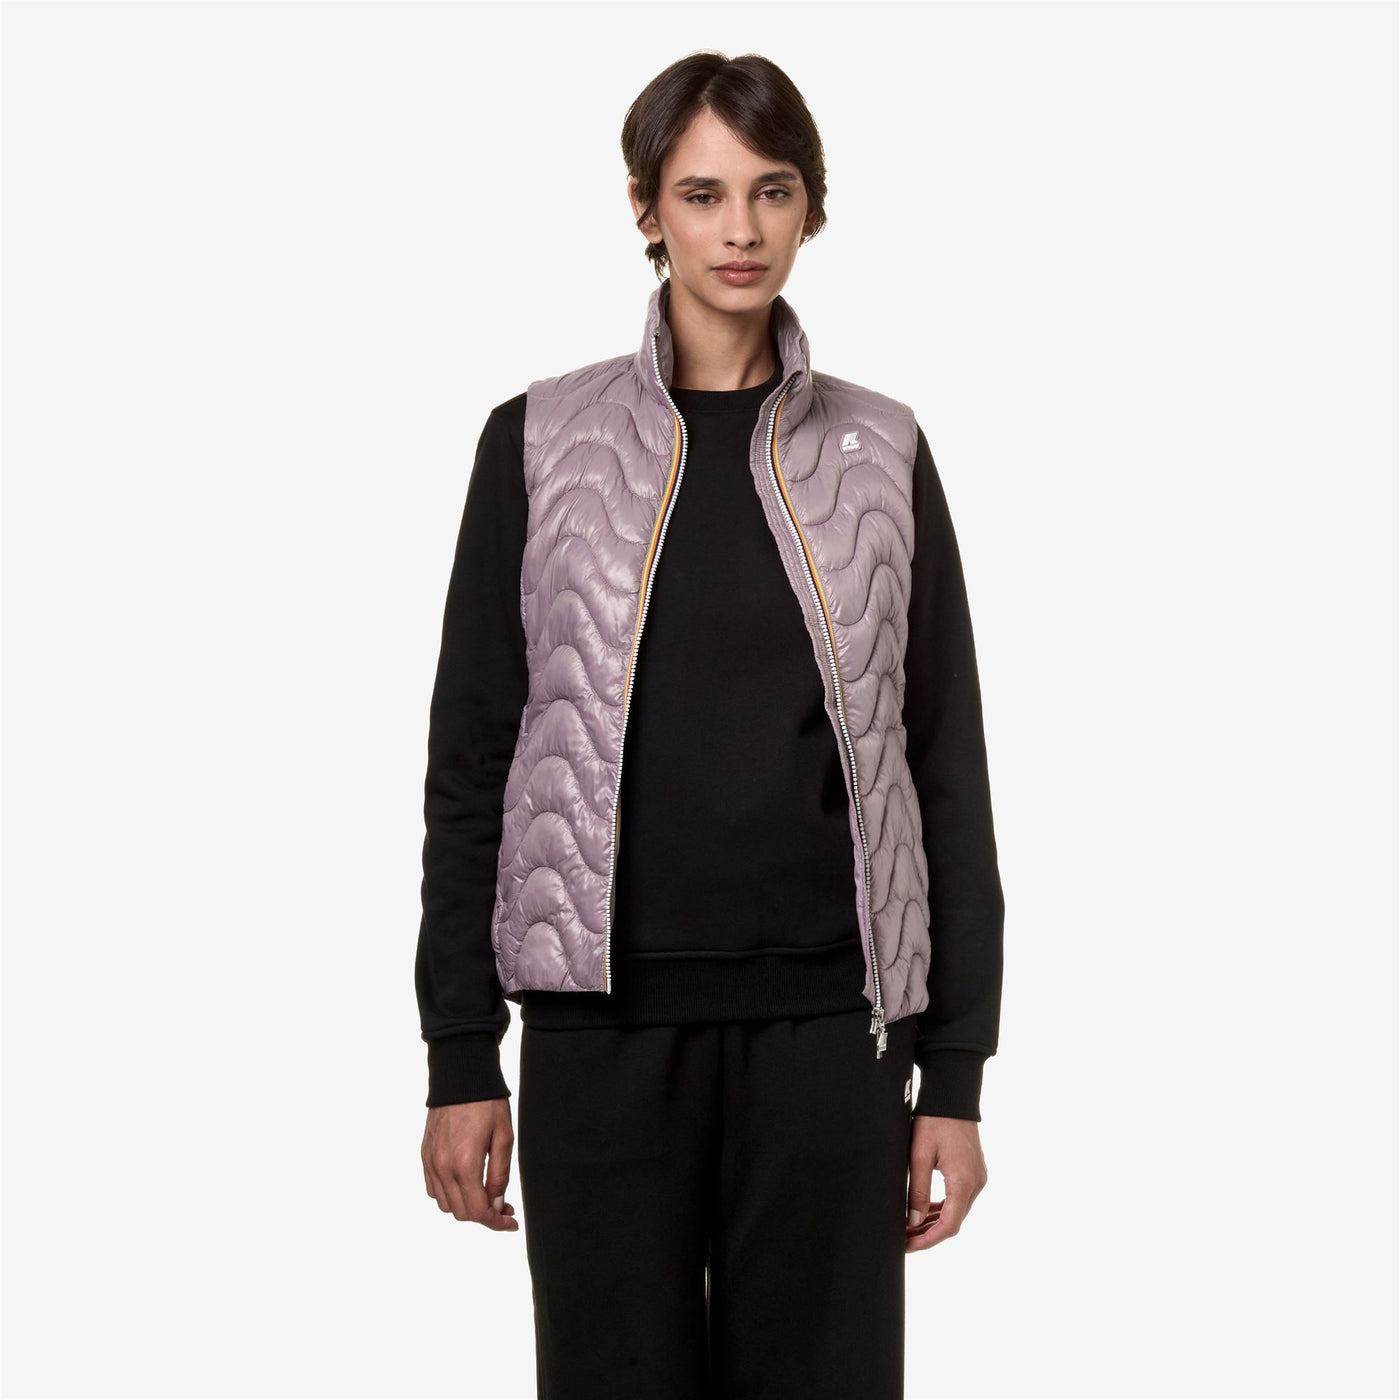 Jackets Woman VIOLE QUILTED WARM Short VIOLET DUSTY Dressed Back (jpg Rgb)		